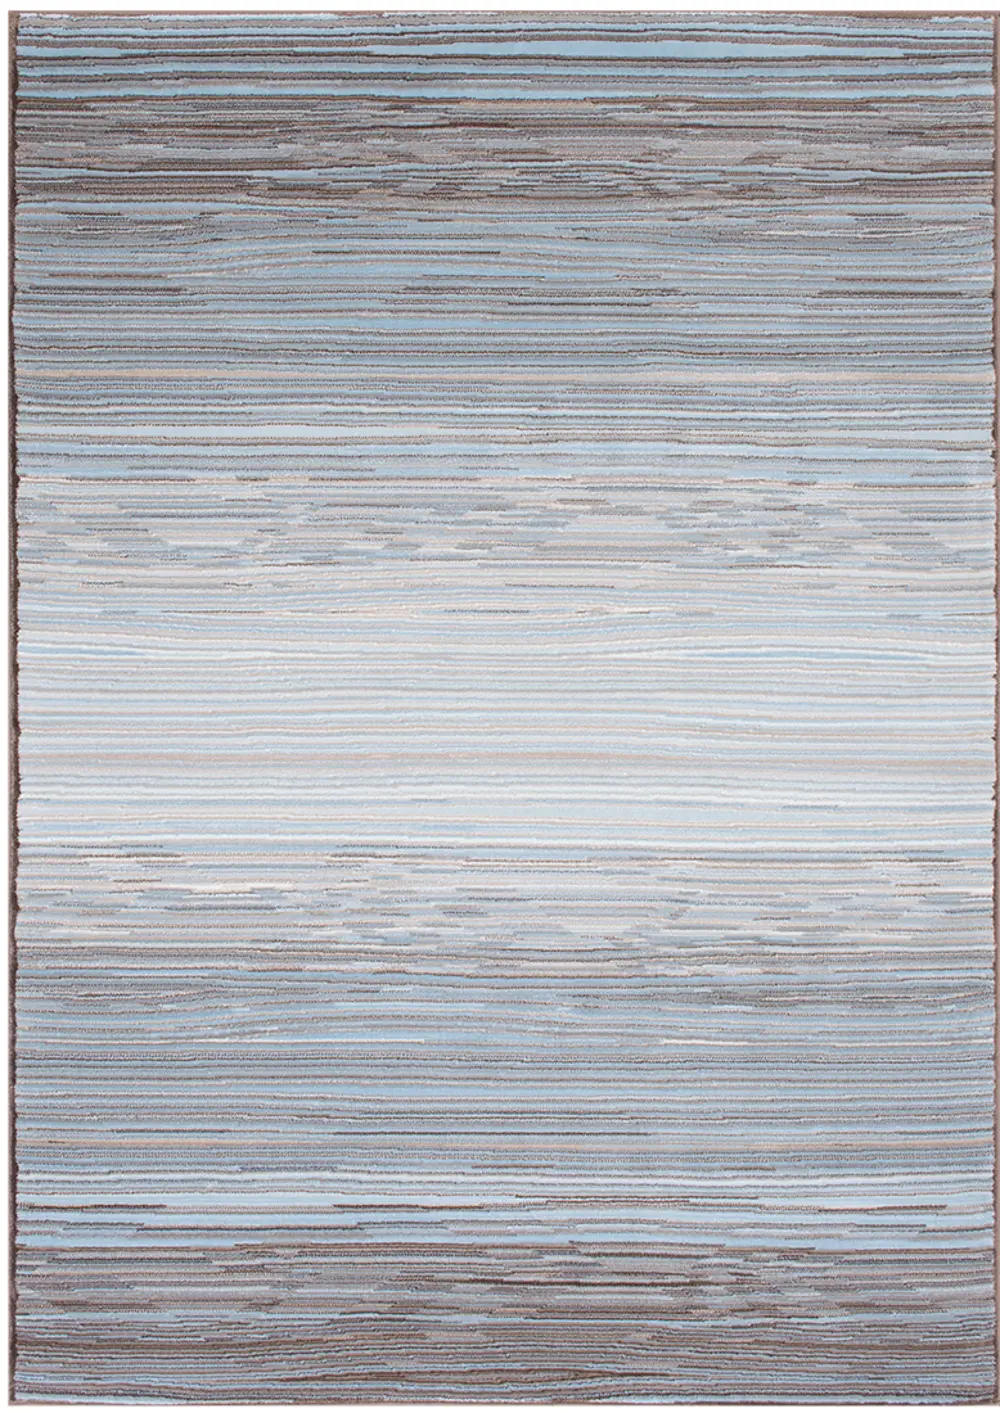 8 x 10 Large Sand Brown and Blue Rug - Cambridge-1